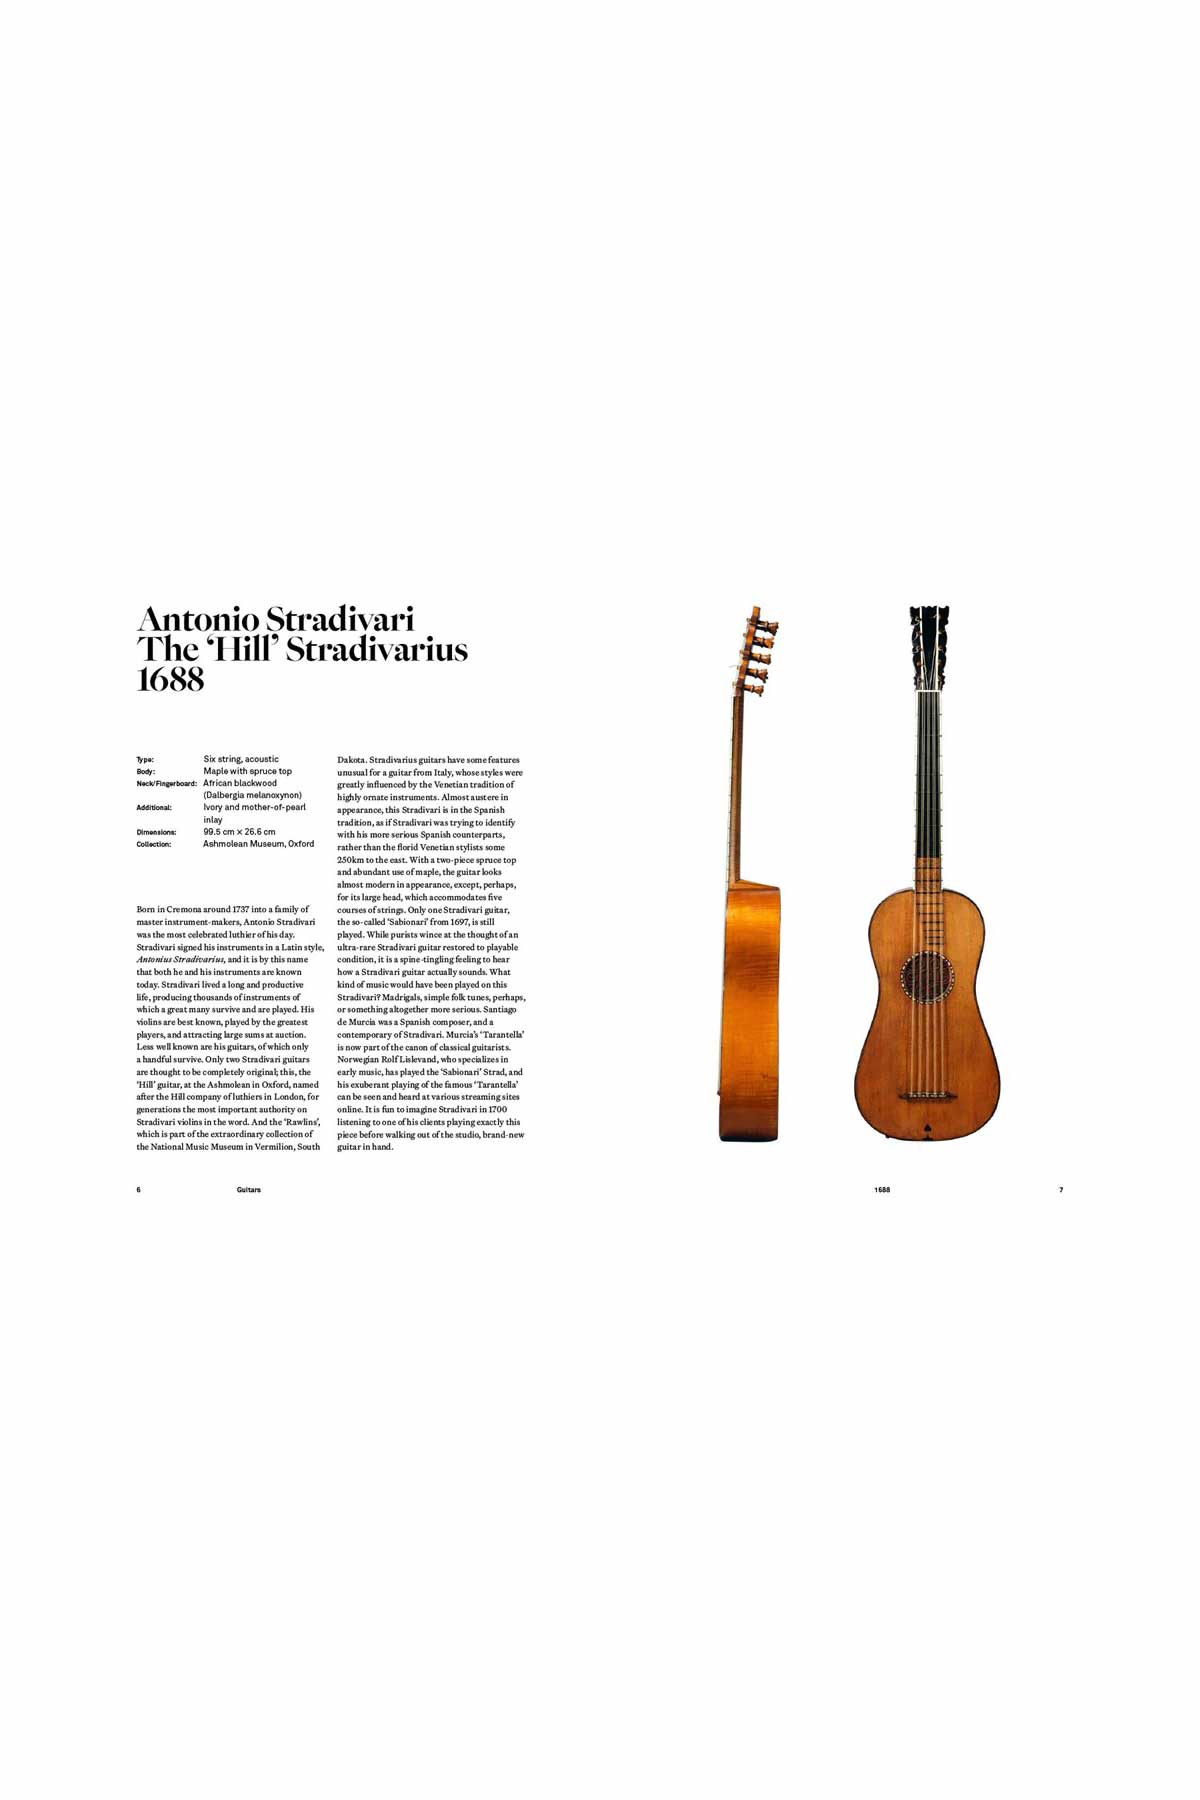 GUITAR: THE SHAPE OF SOUND (100 Iconic Designs)